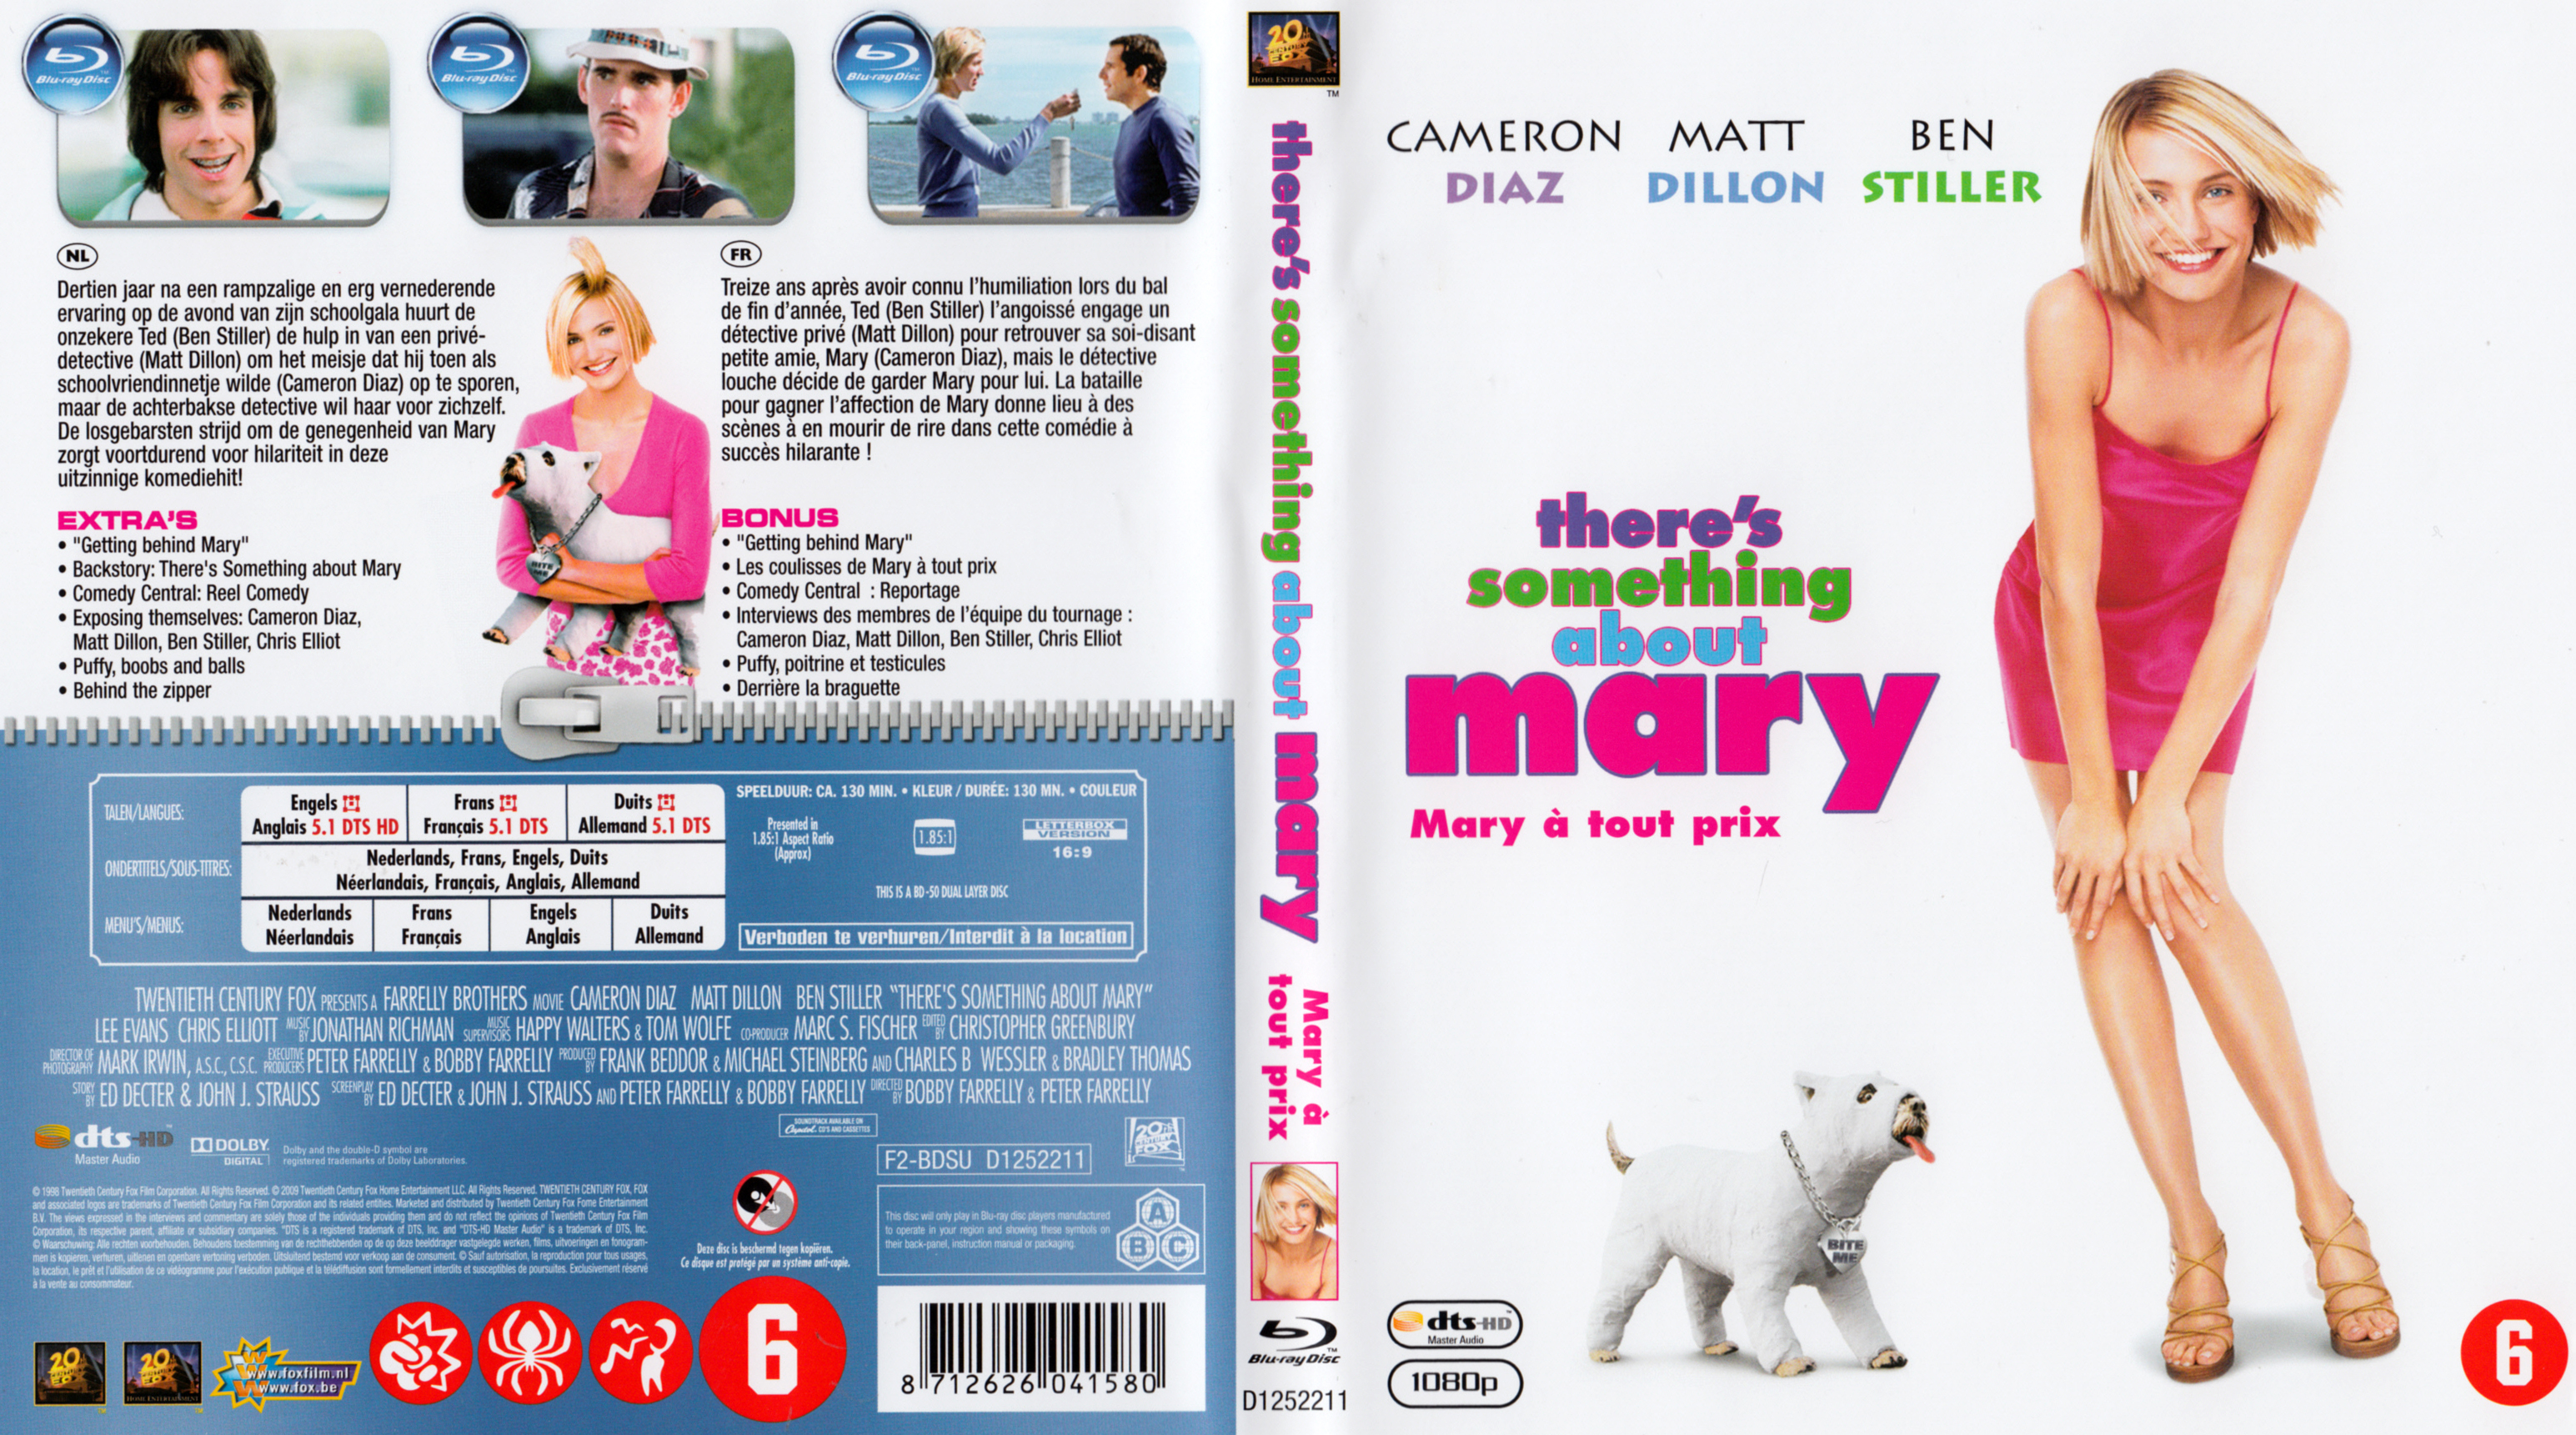 Jaquette DVD Mary  tout prix (BLU-RAY) v2